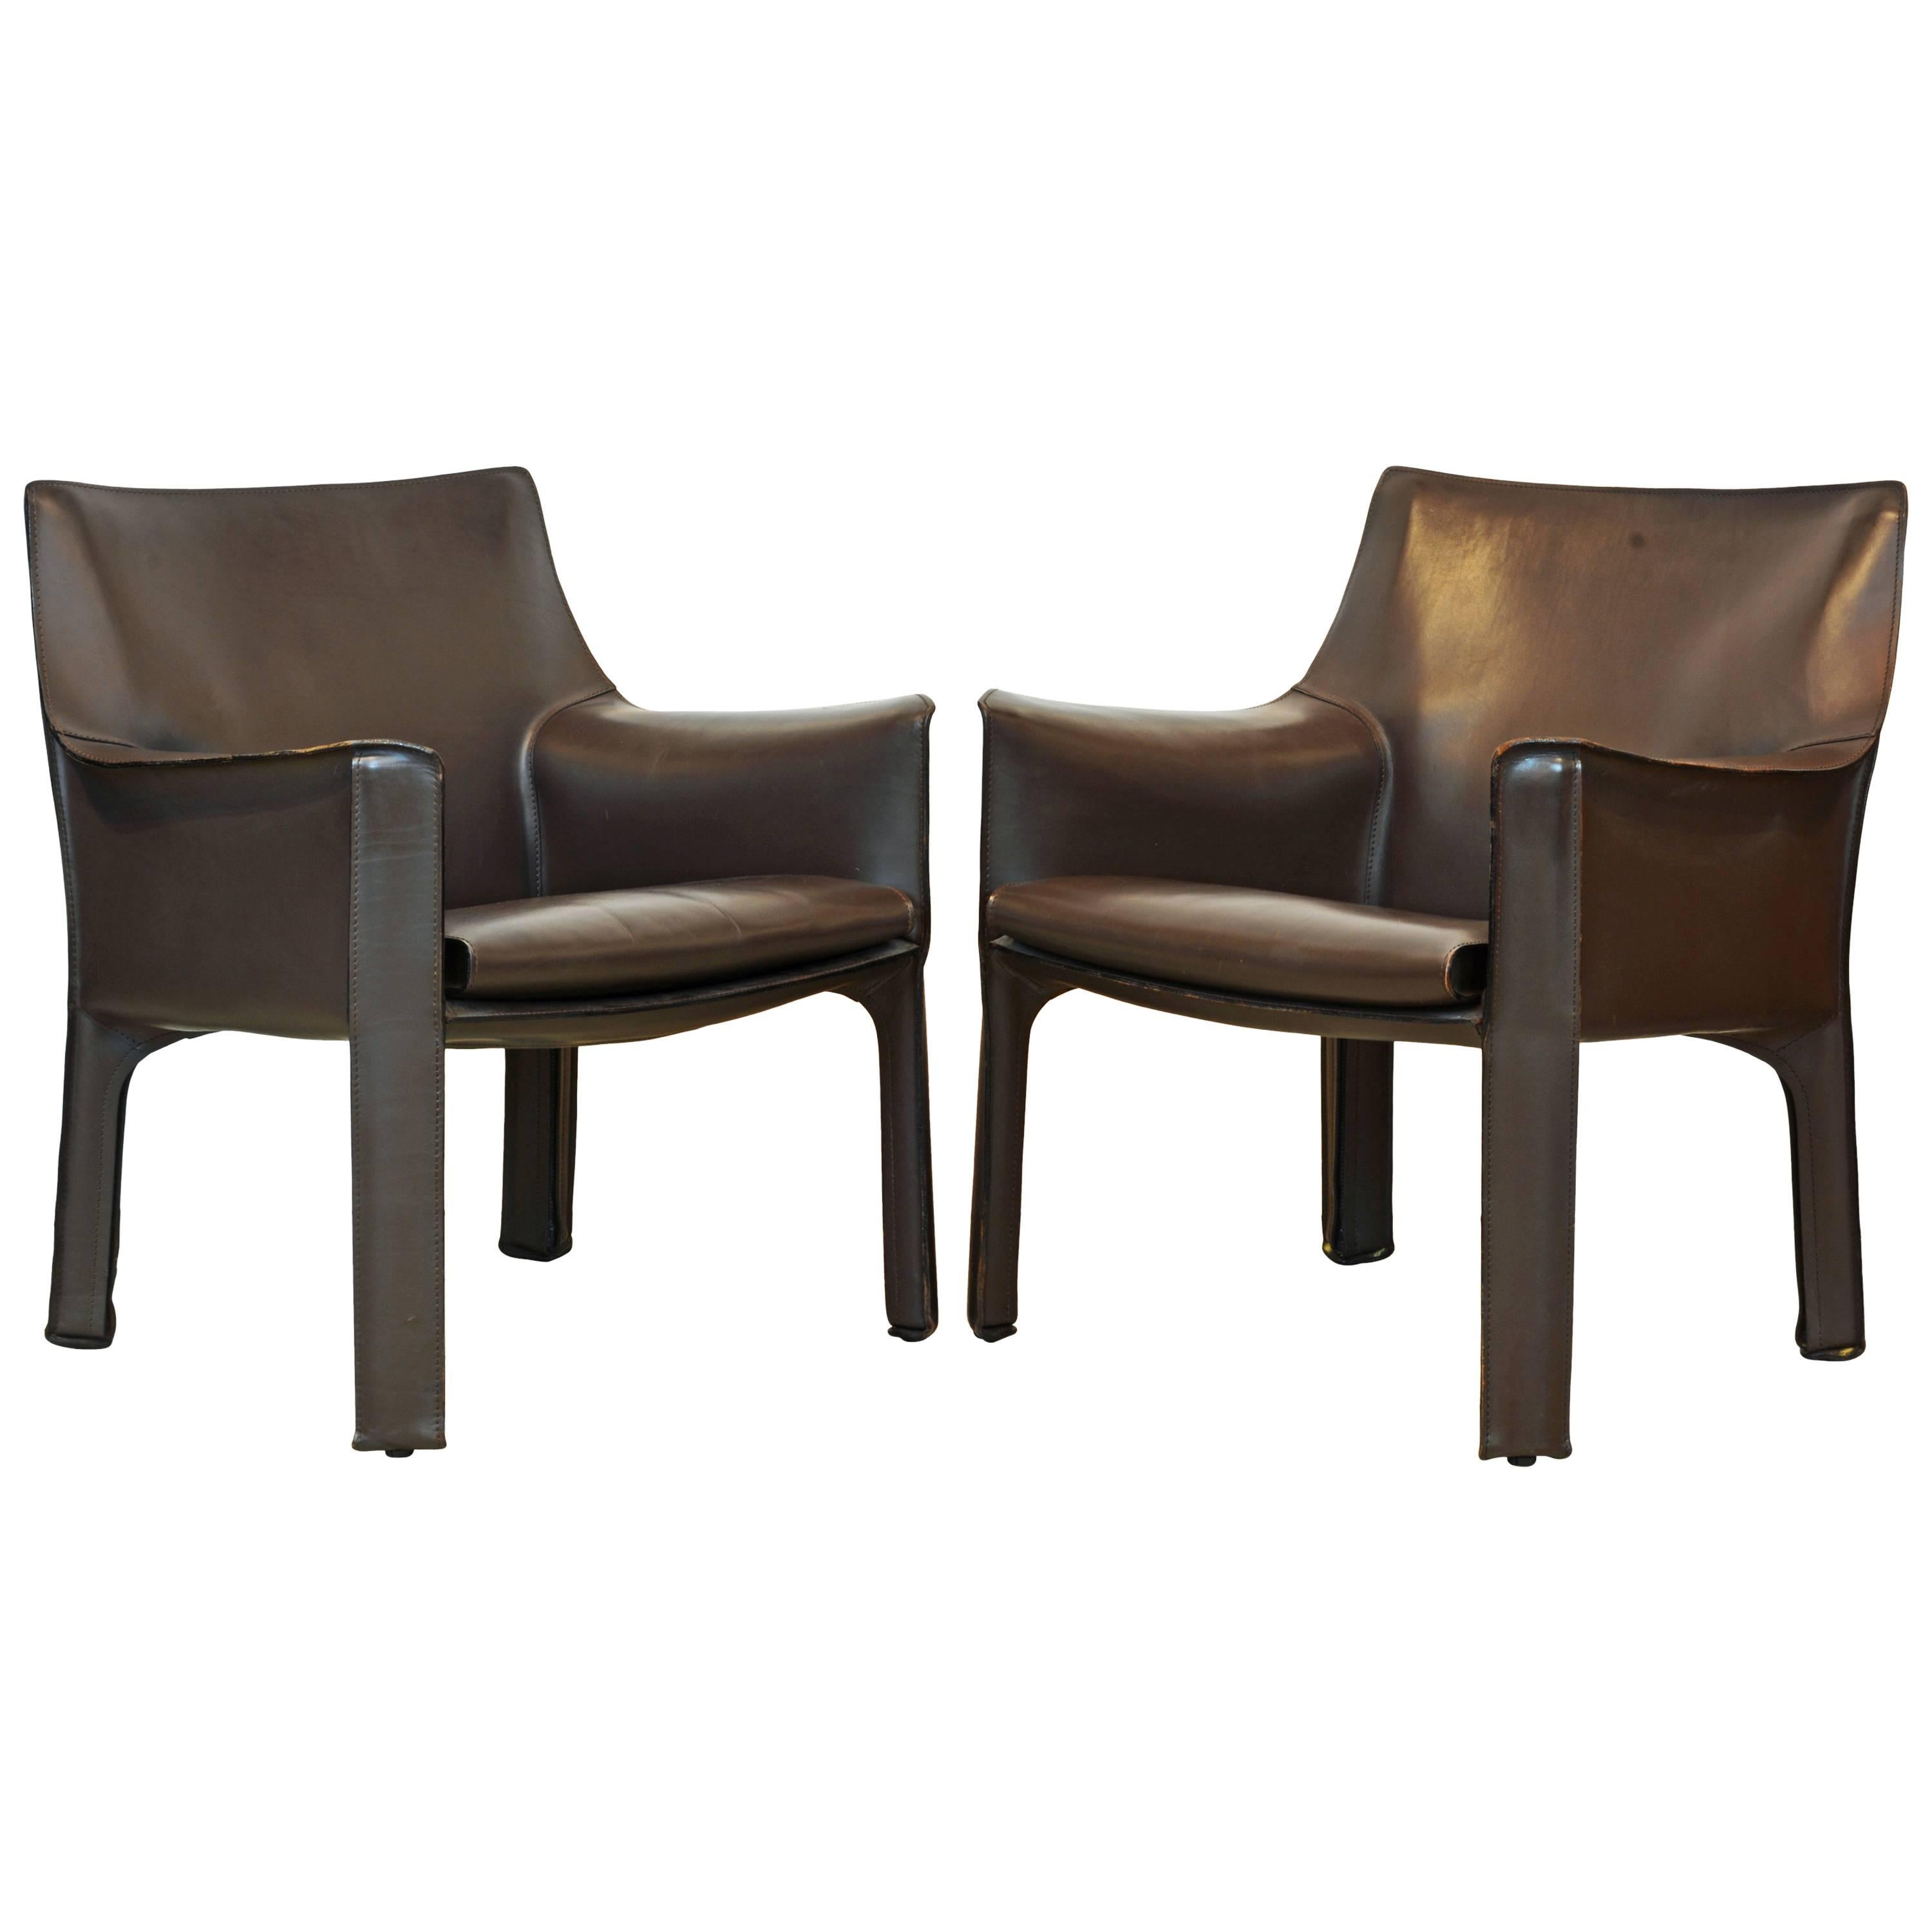 Pair of Mario Bellini Design Leather Cab Lounge Chairs by Cassina, Italy